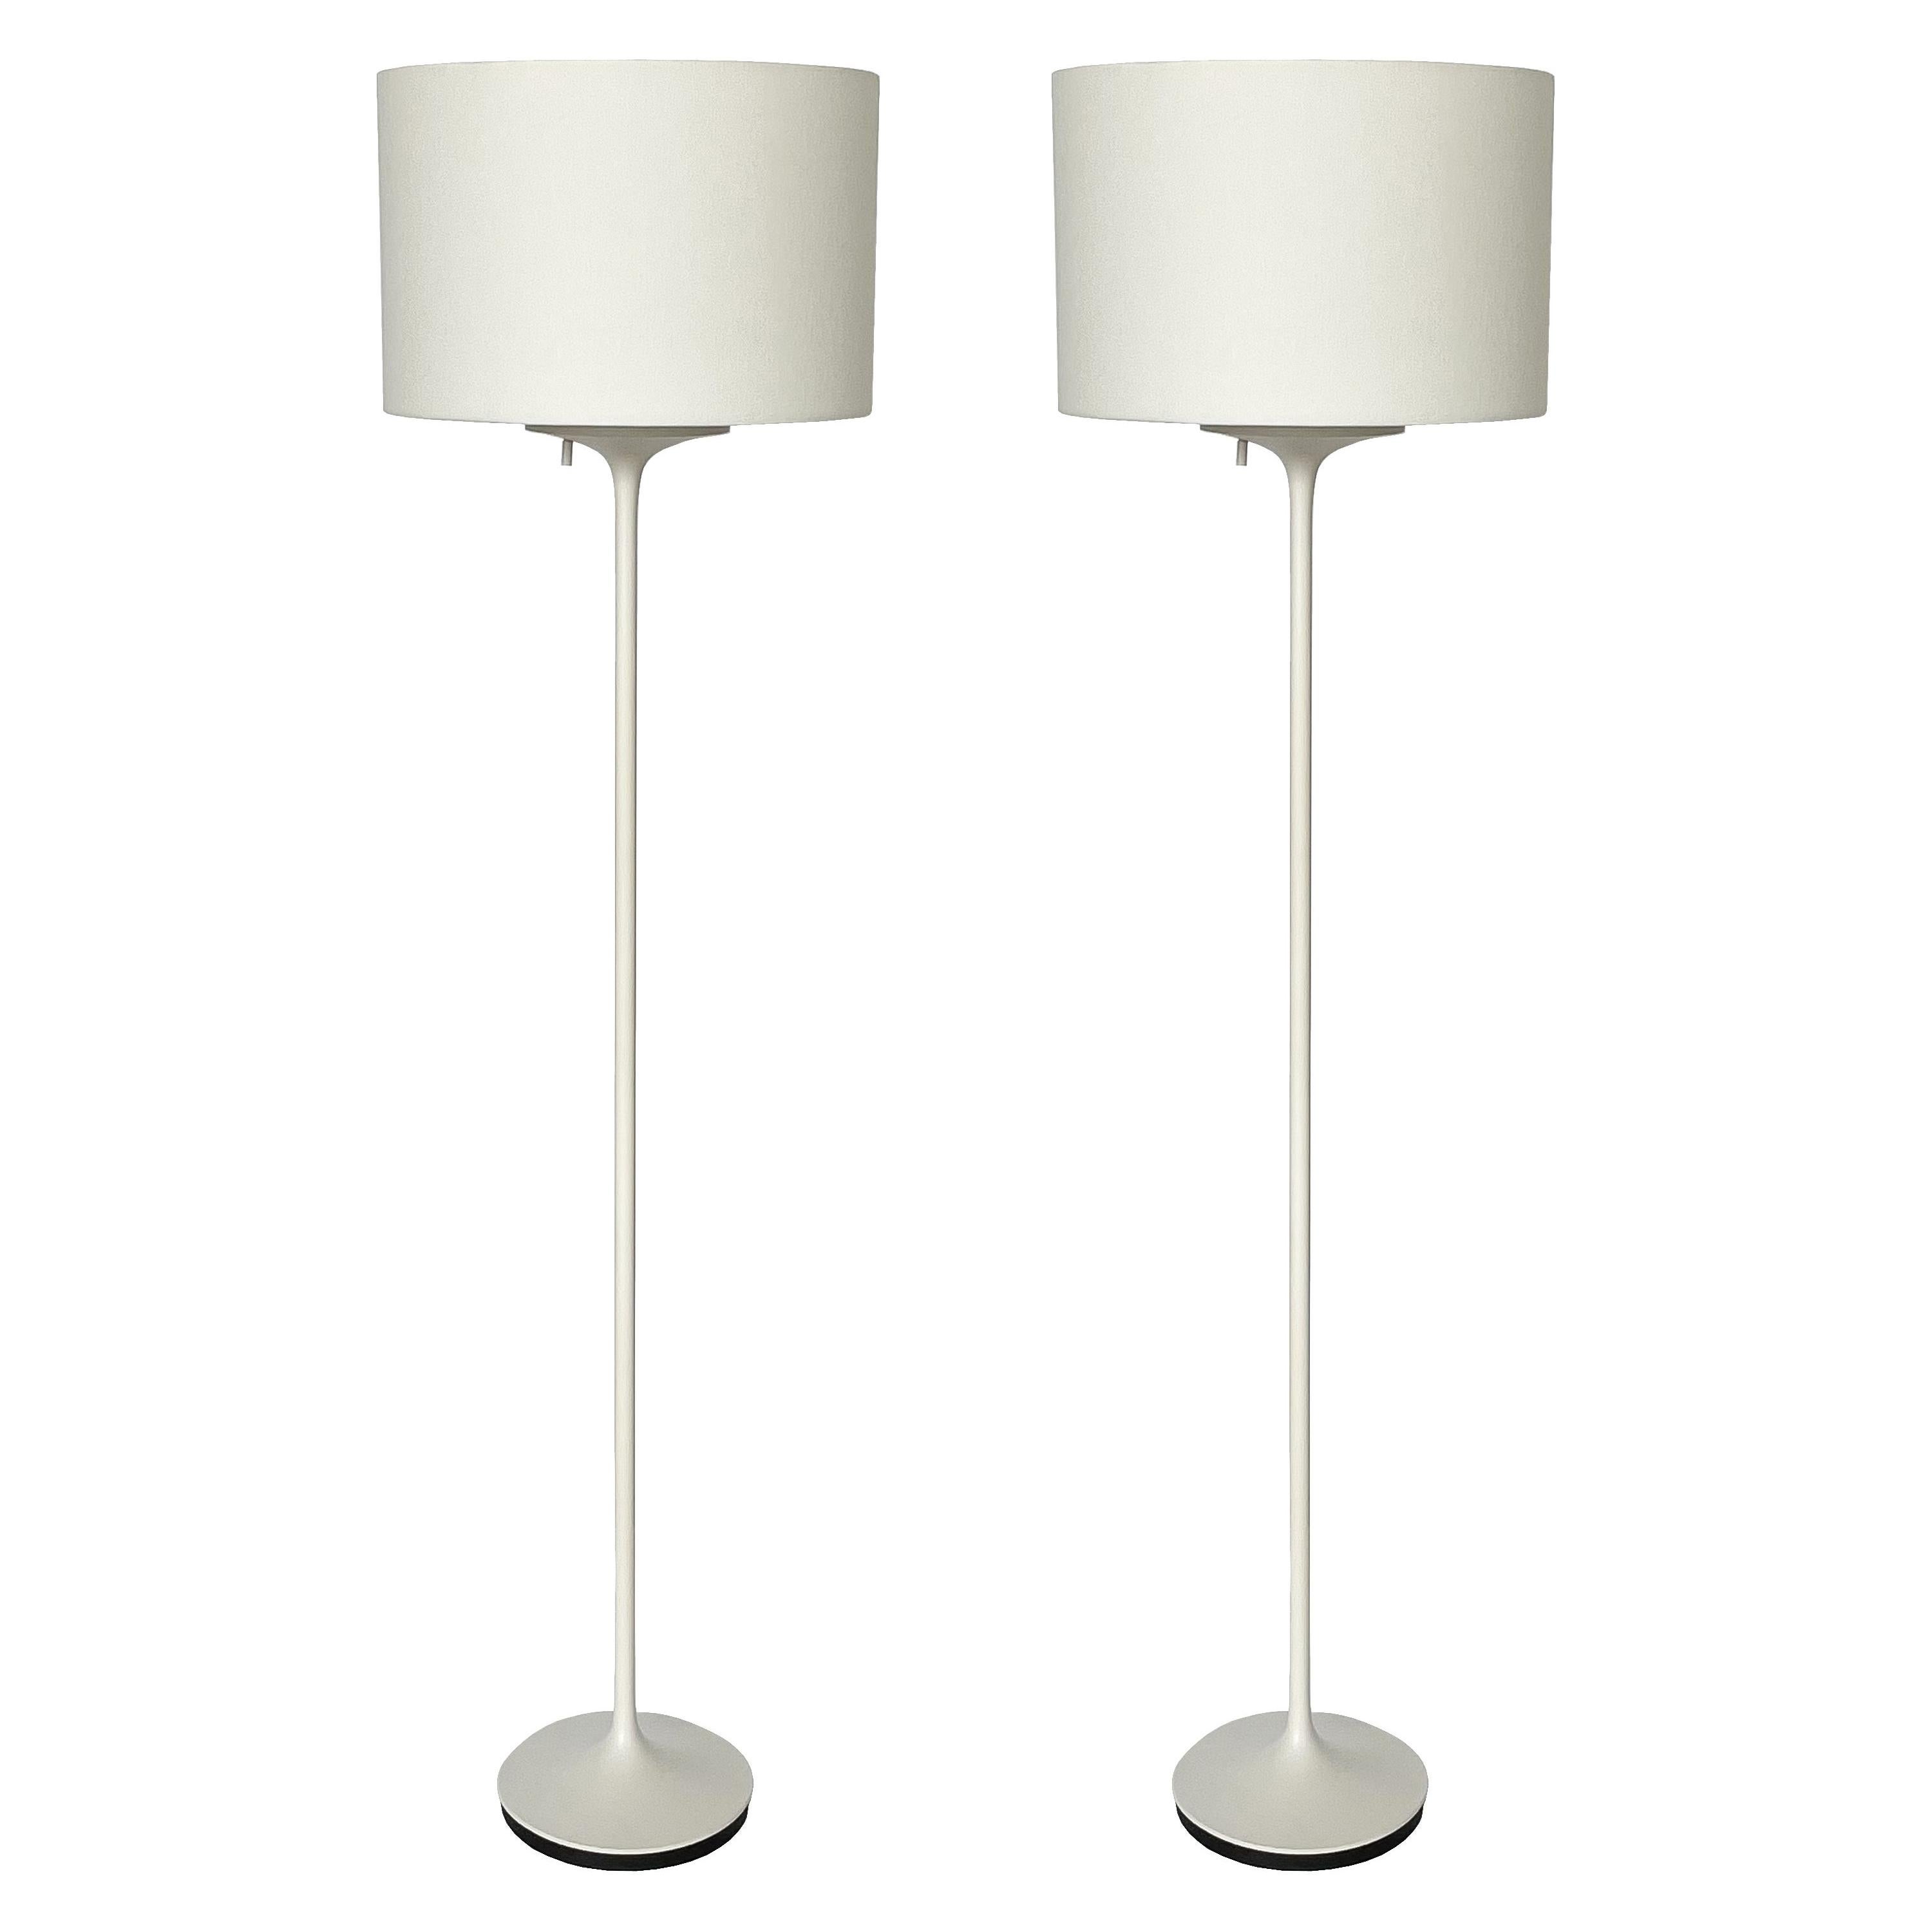 Pair of Bill Curry Stemlite Floor Lamps for Design Line